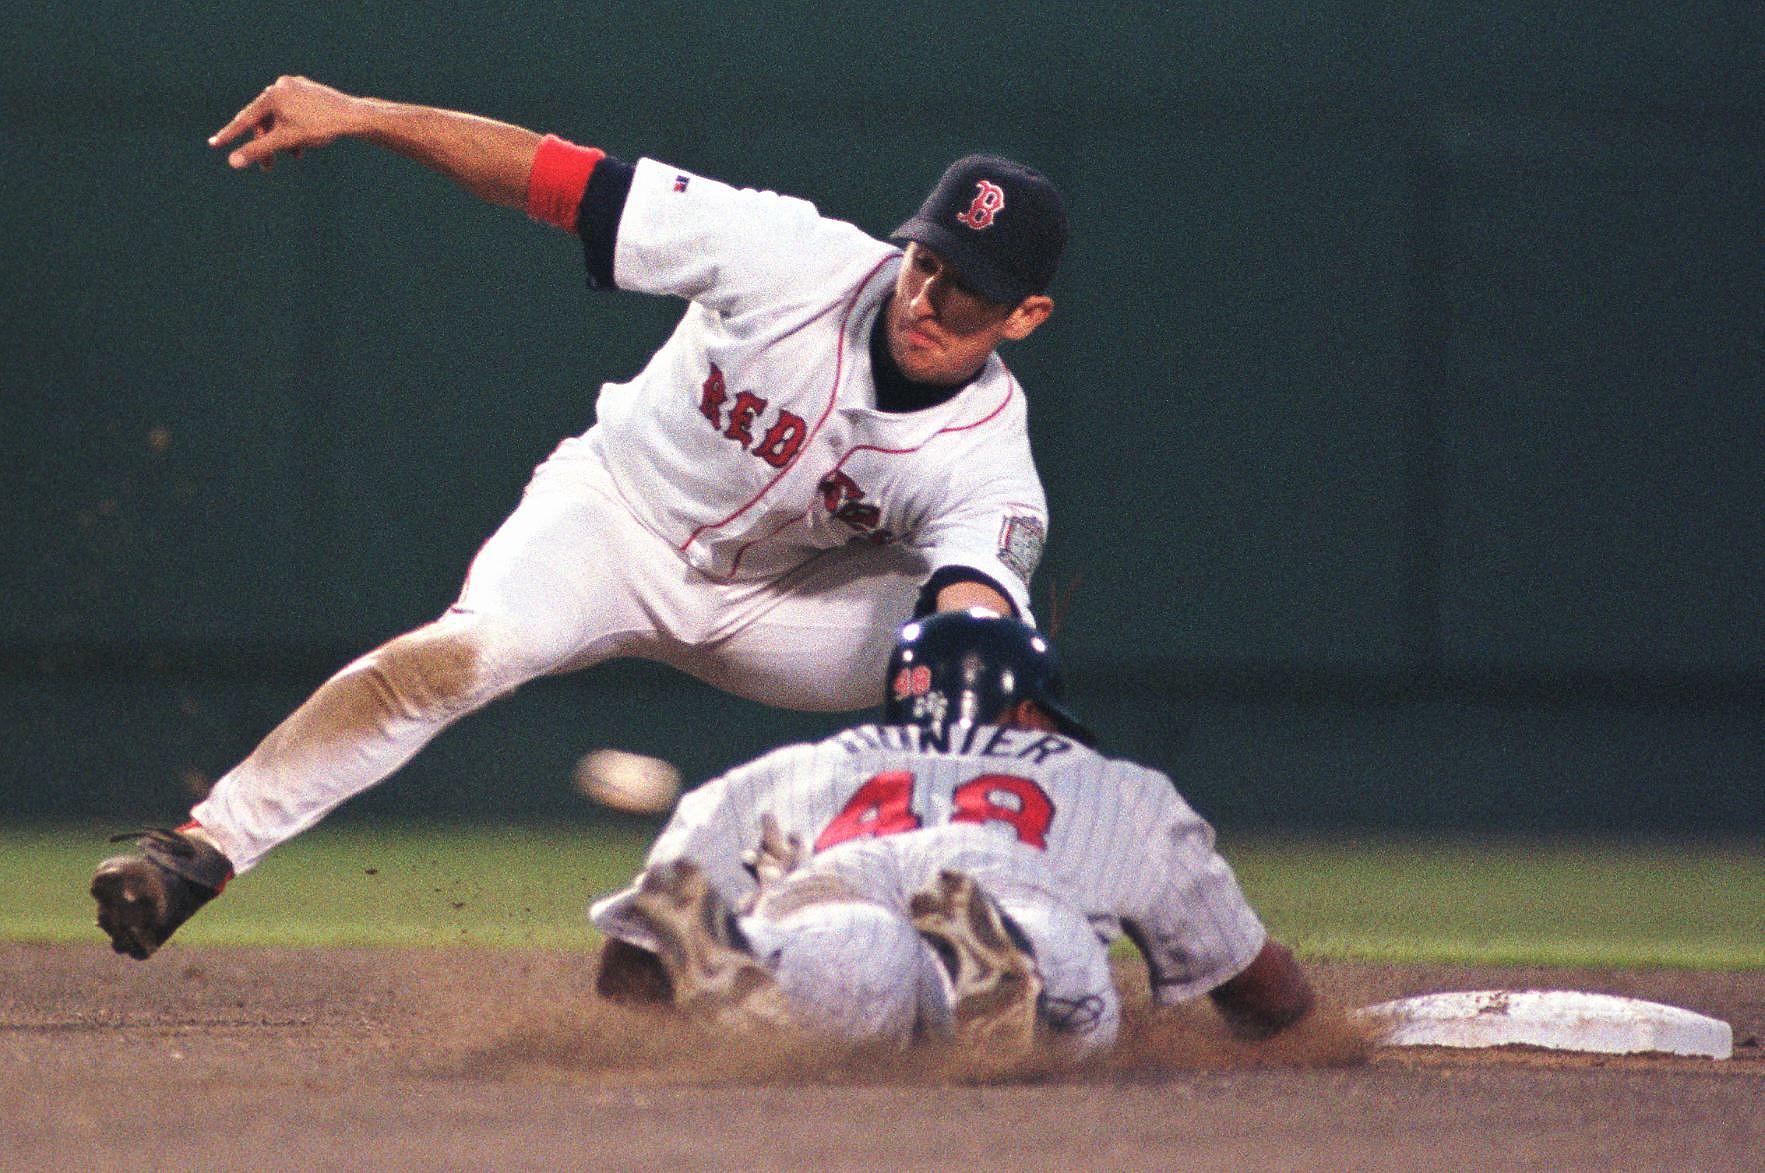 Sports Q: Who was the better Red Sox player, Fred Lynn or Nomar Garciaparra?